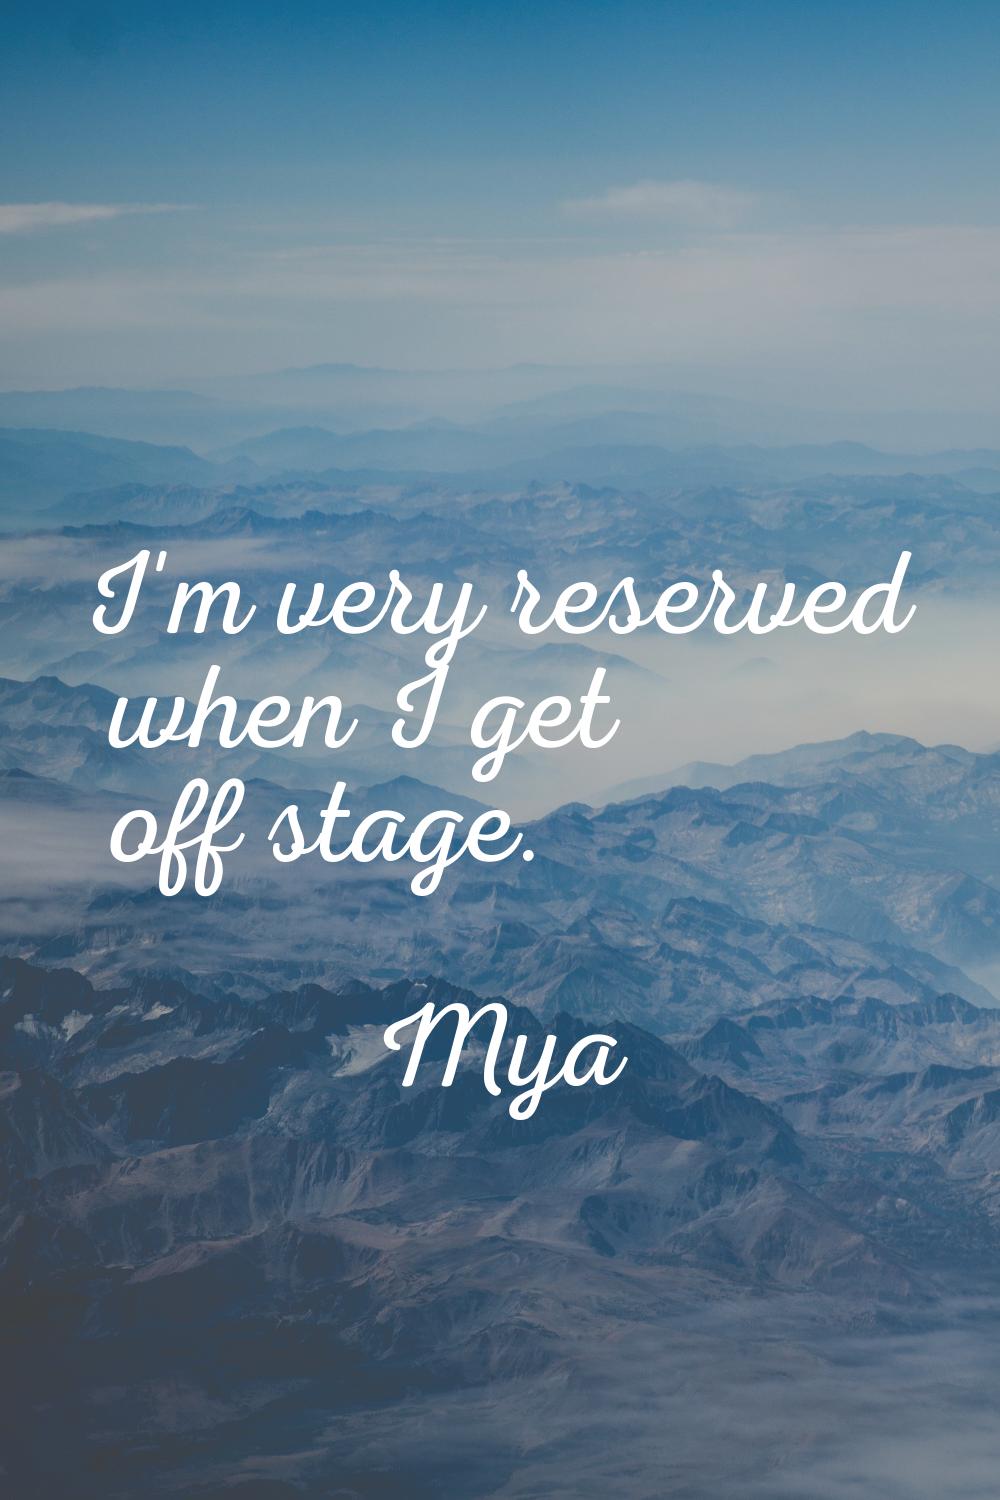 I'm very reserved when I get off stage.